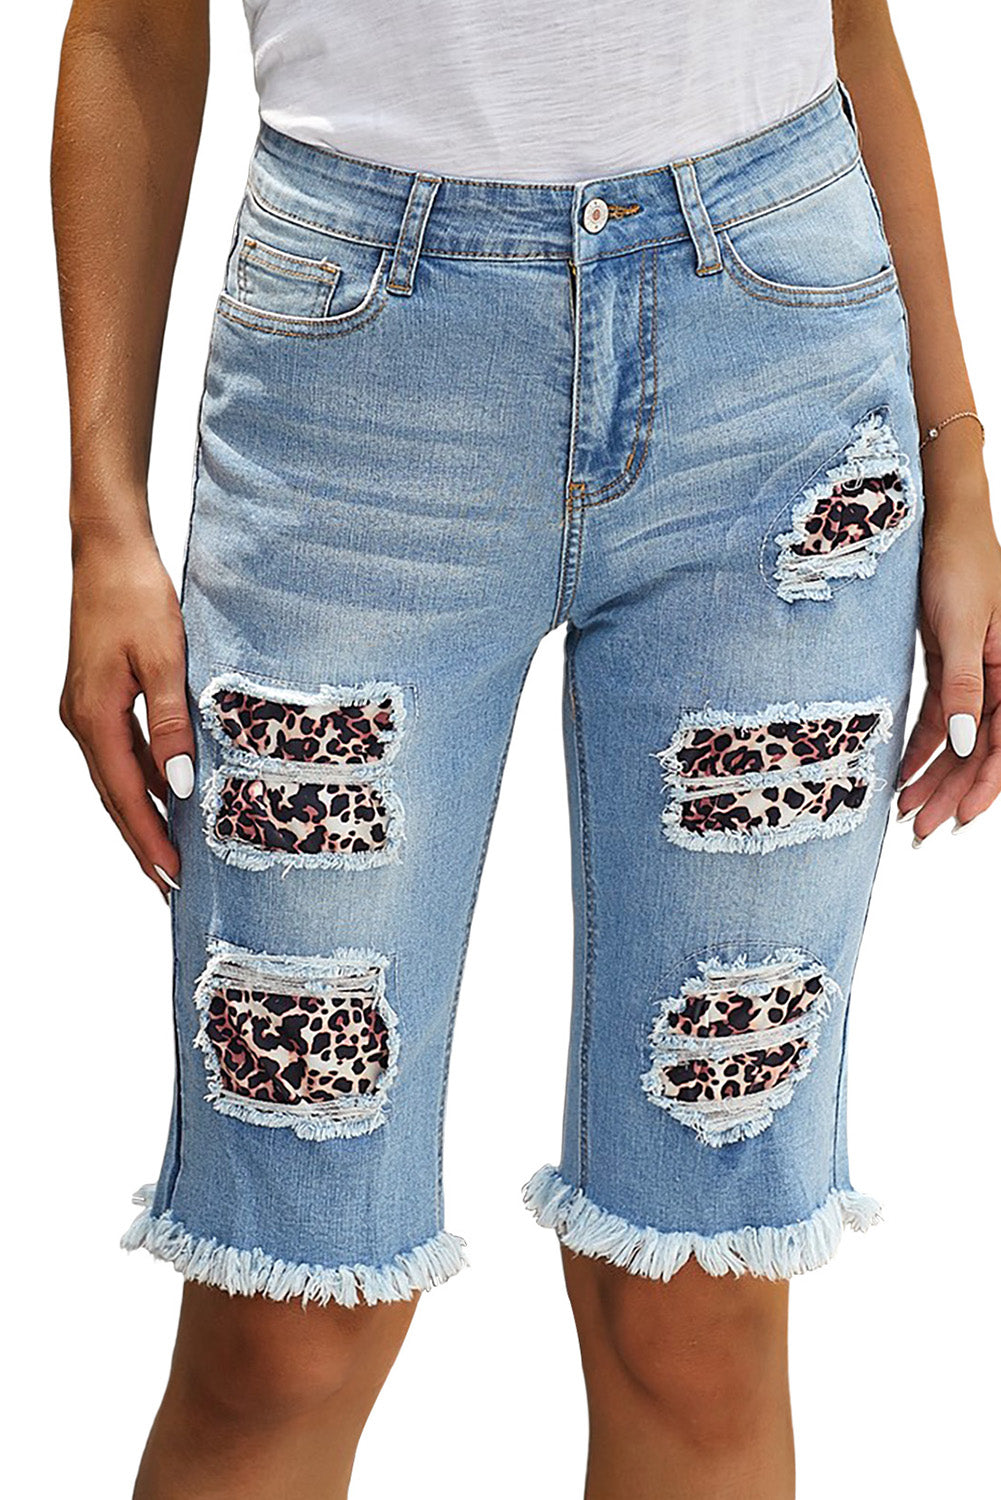 Leopard Mid Rise Ripped Destroyed Patches Bermuda Shorts Jeans LC781578-20